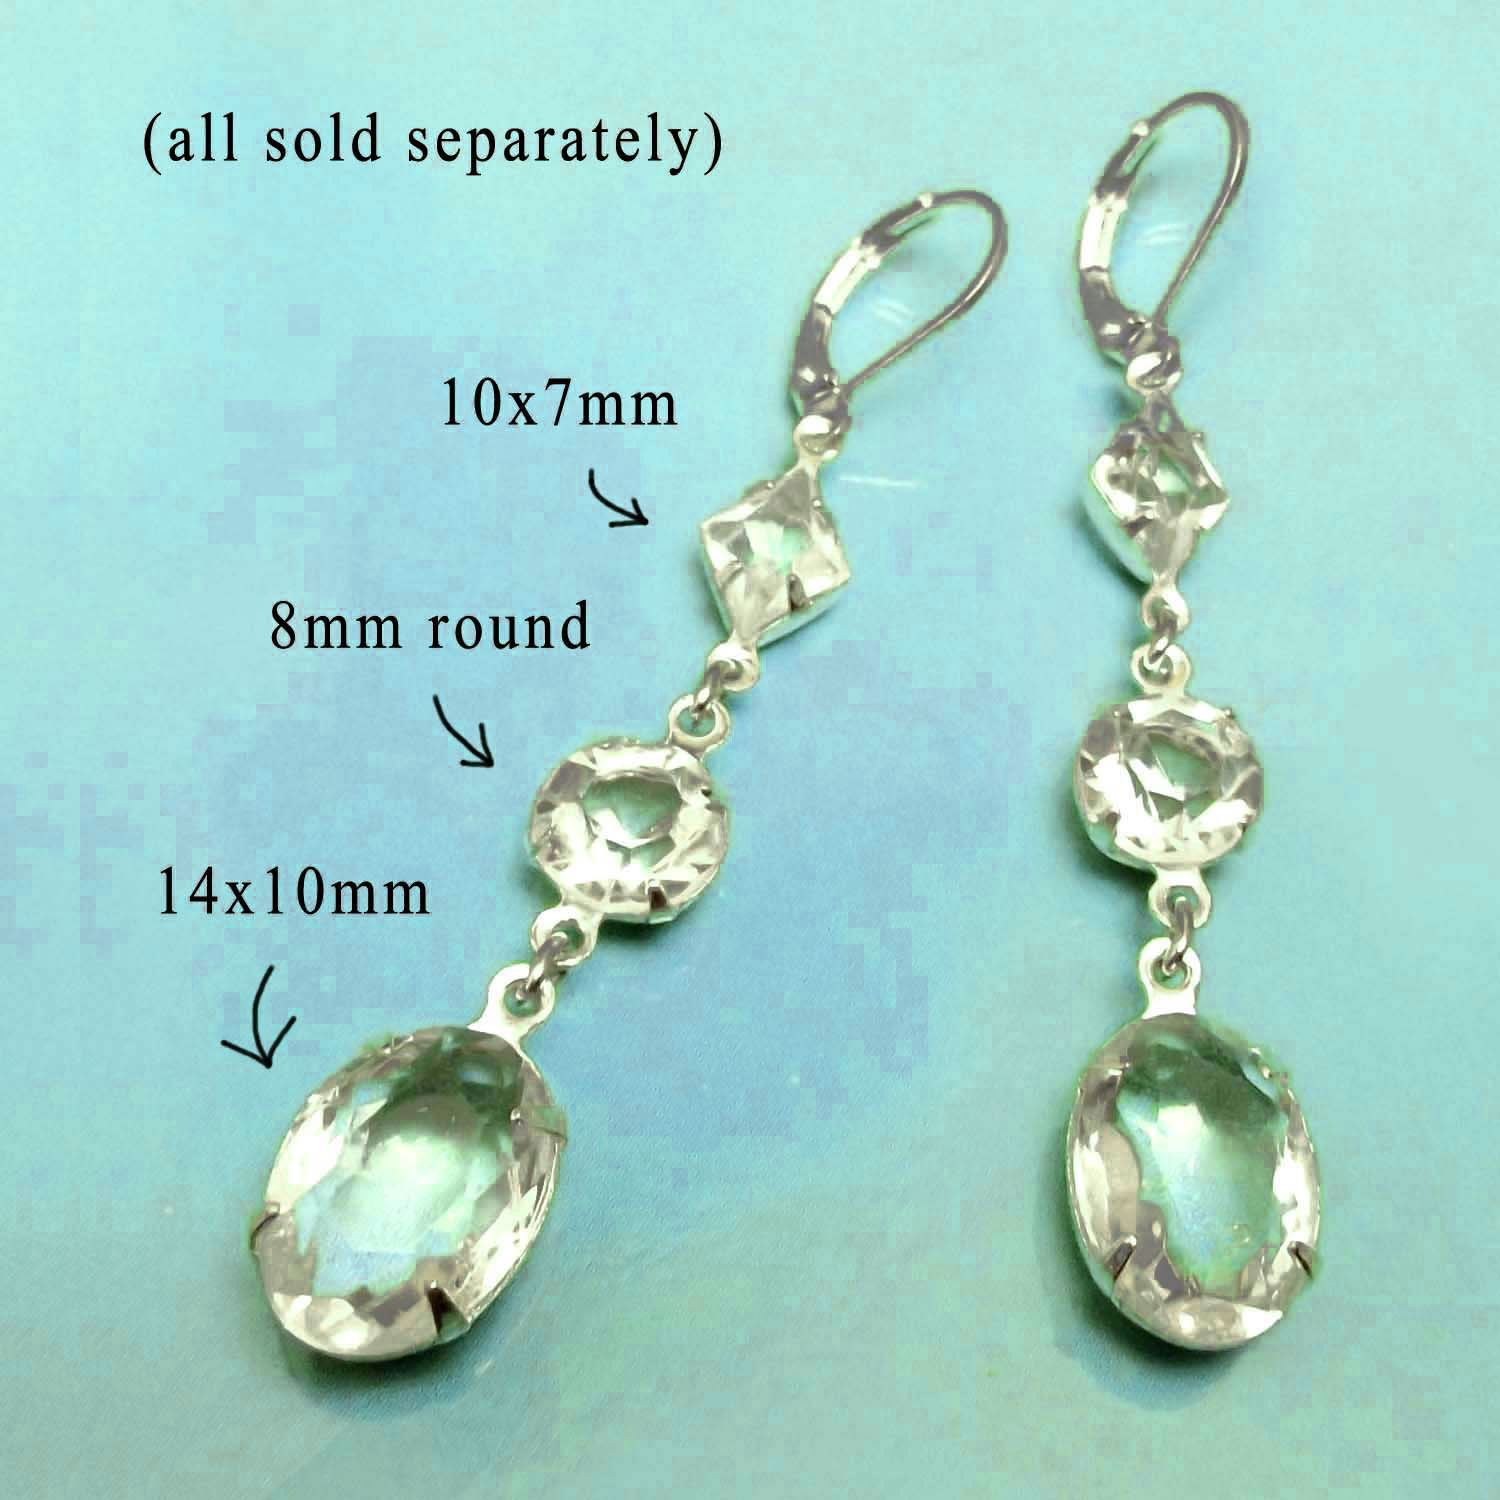 DIY earring design idea featuring clear glass jewels in silver plated brass settings